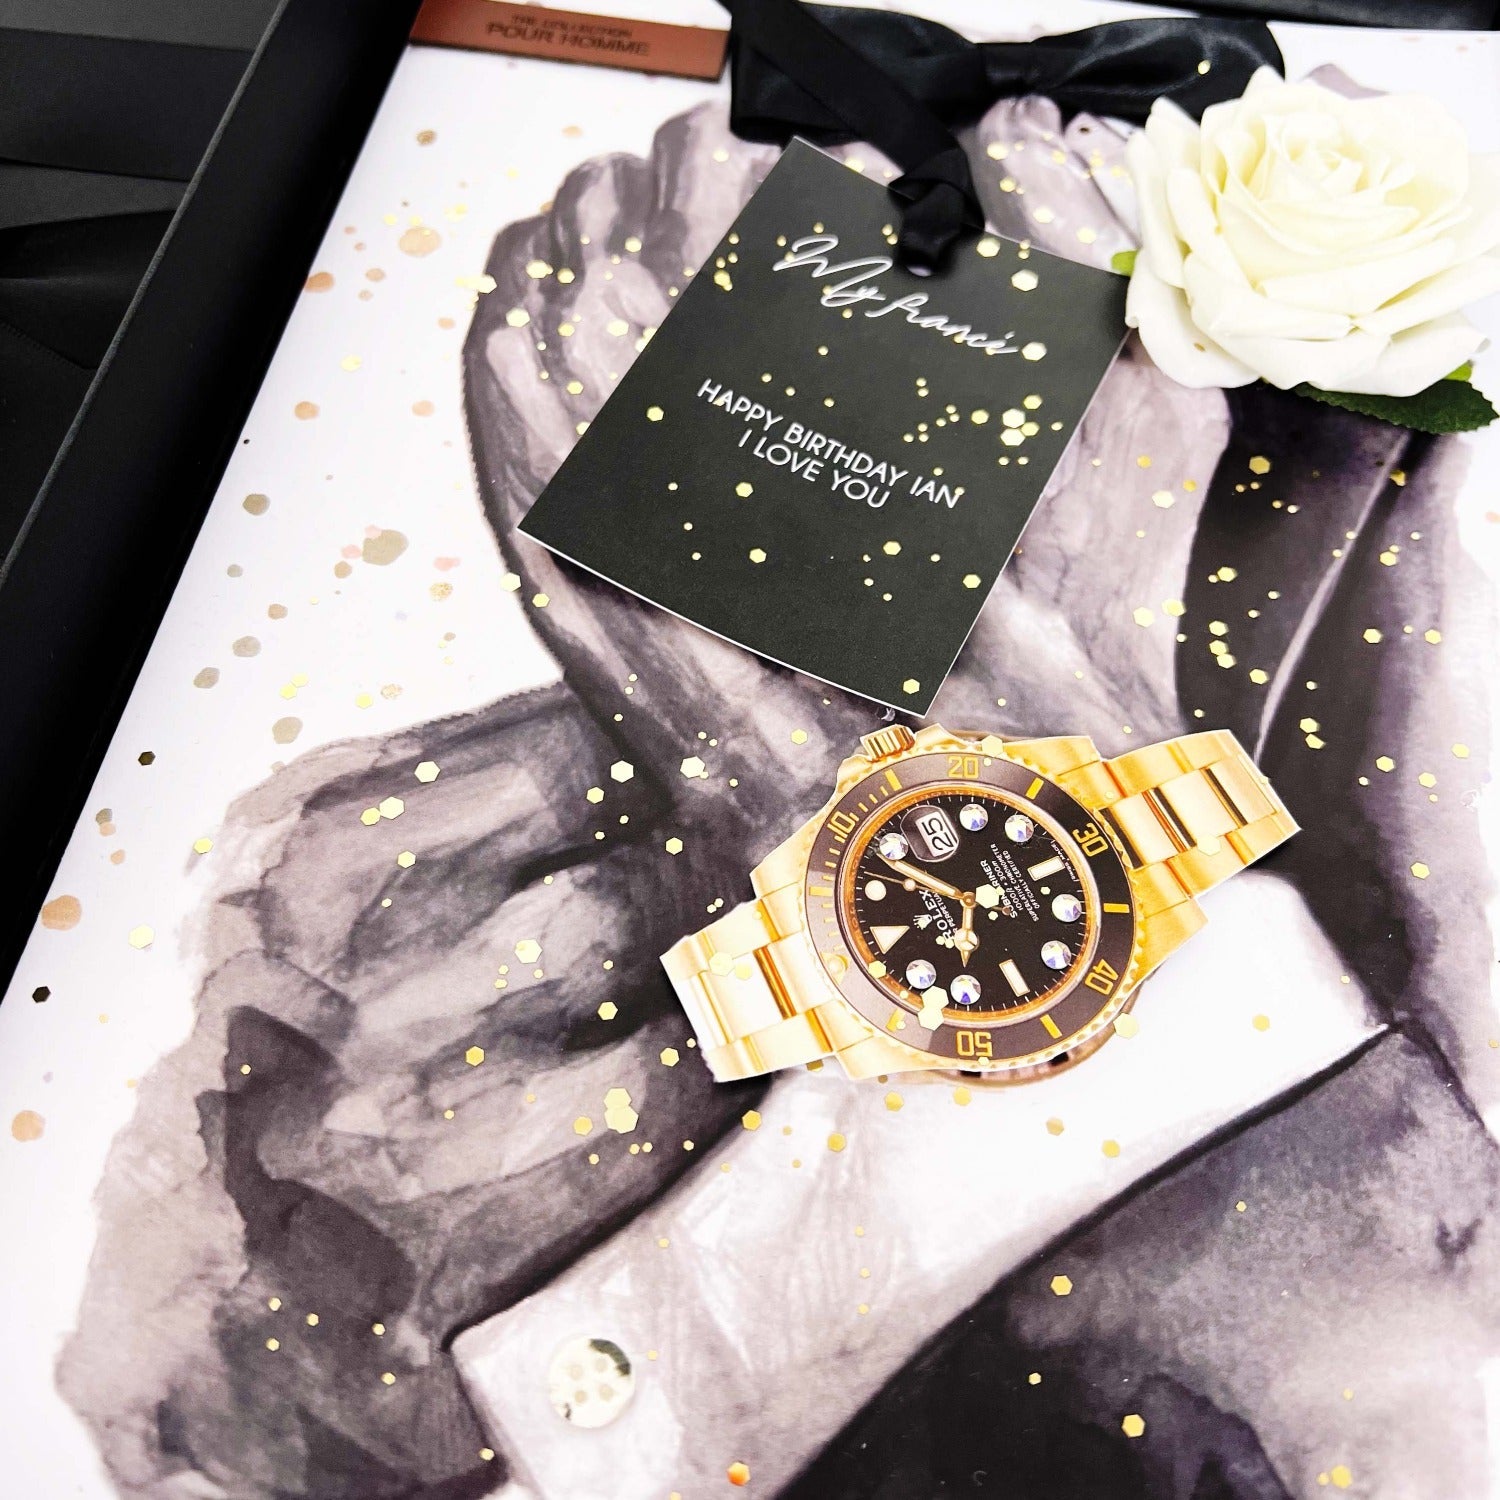 Personalised scented greetings card for him with Swarosvki crystal encrusted rolex style watch.